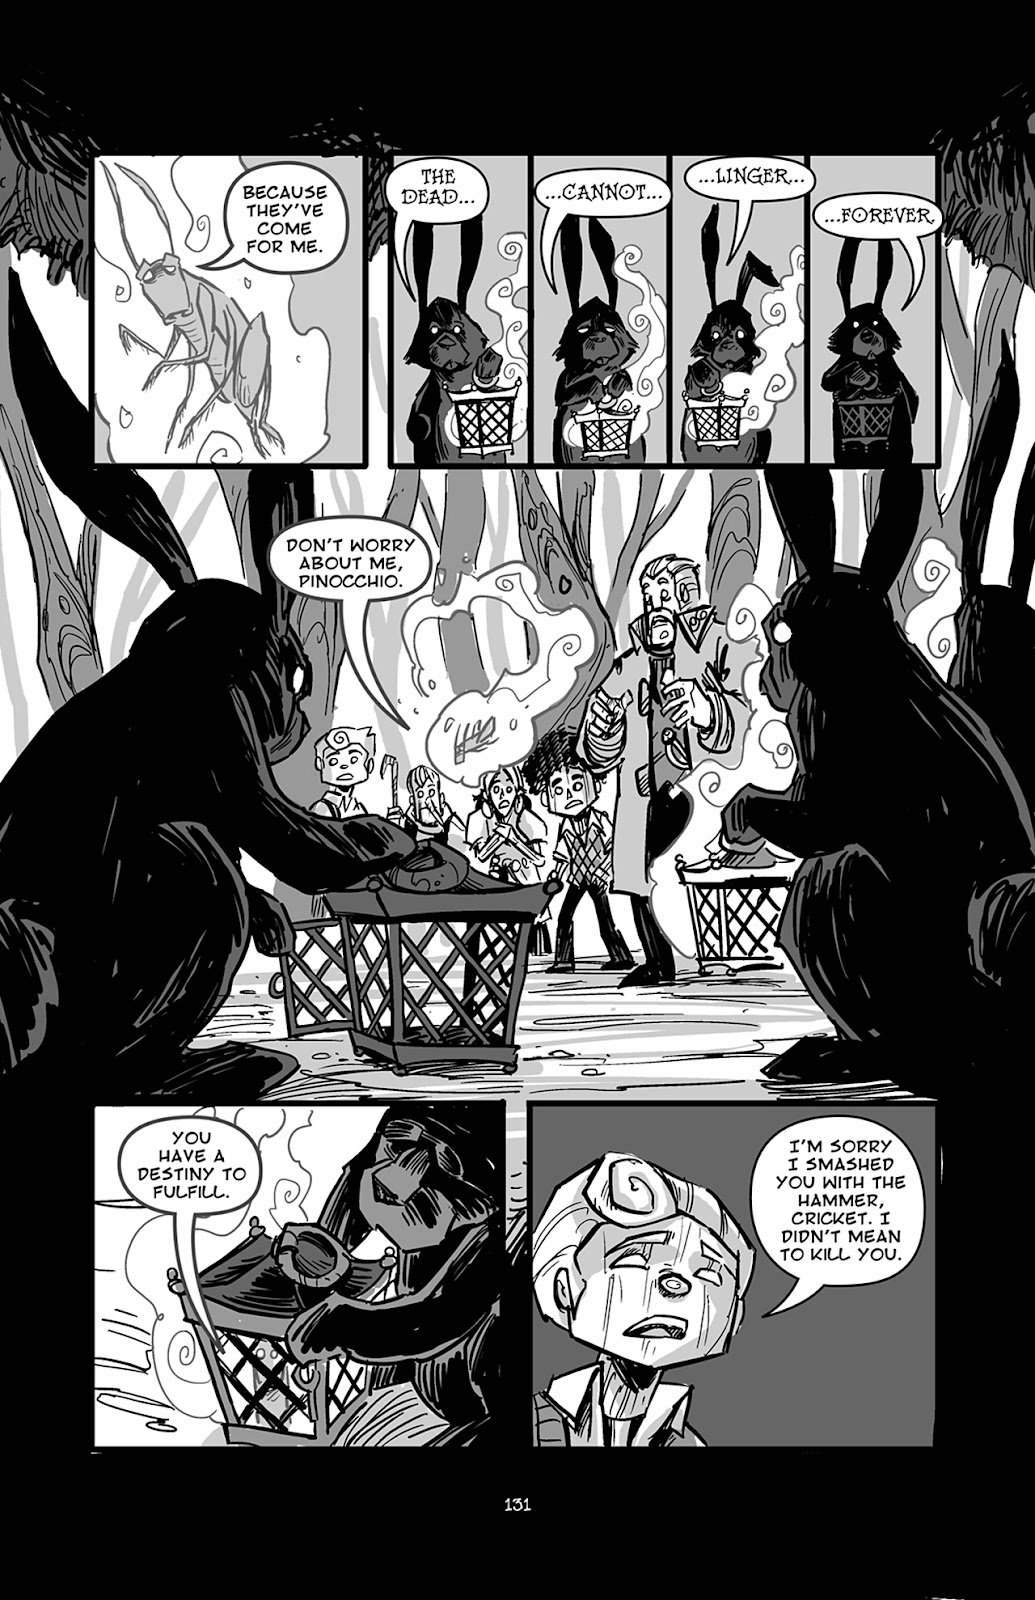 Pinocchio: Vampire Slayer - Of Wood and Blood issue 6 - Page 8